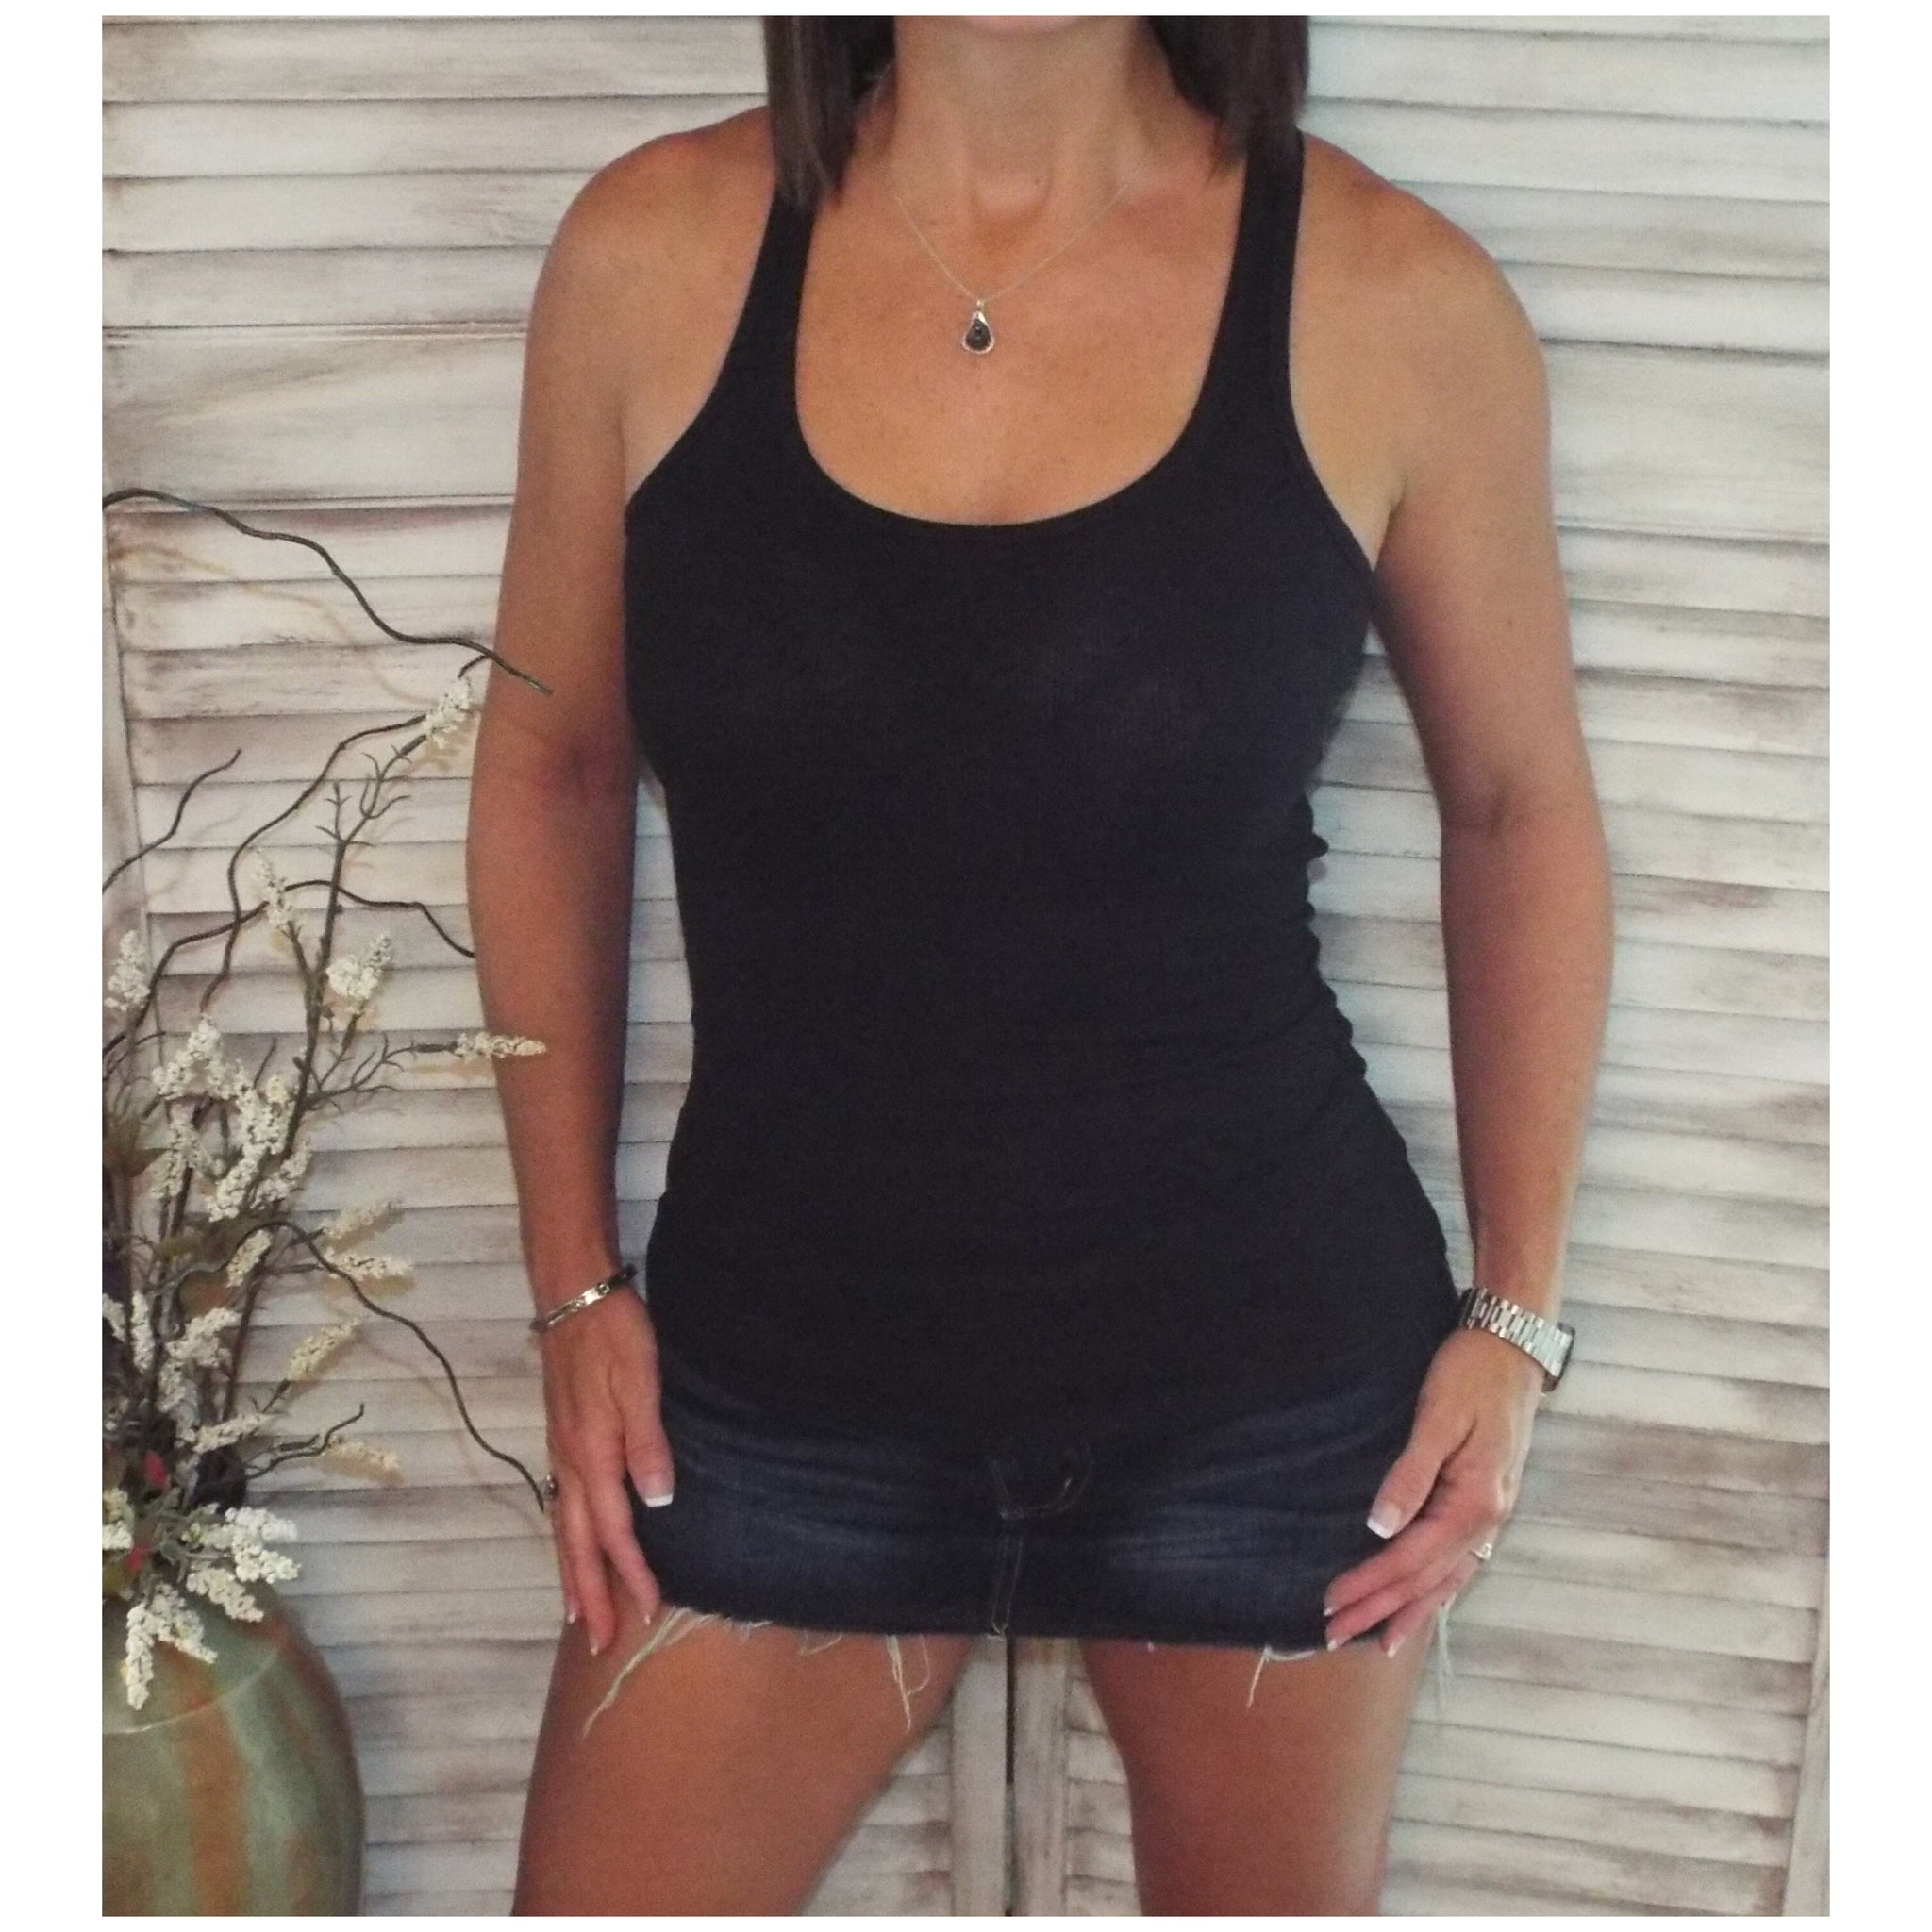 “Can’t Touch This” Ribbed Racerback Low Scoop Boy Beater Cleavage Tank Top Black S/M/L/XL